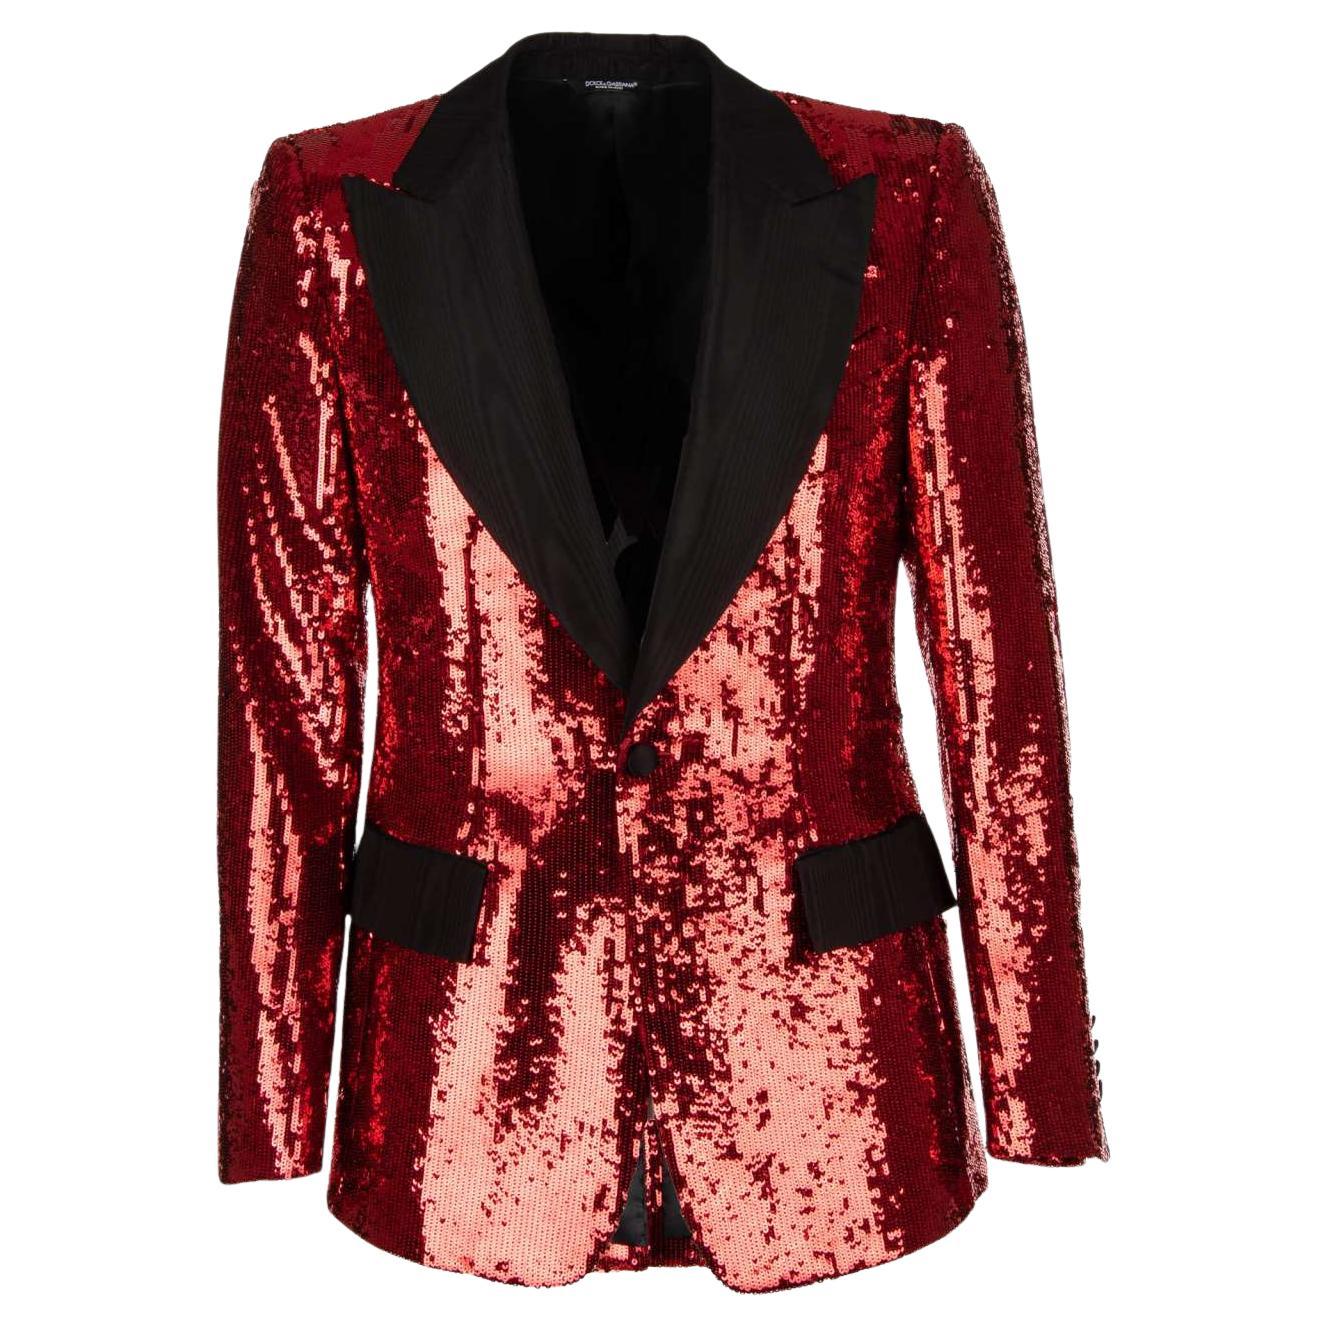 Dolce & Gabbana - Sequined Tuxedo Blazer with Moire Lapel Red Black 58 For Sale